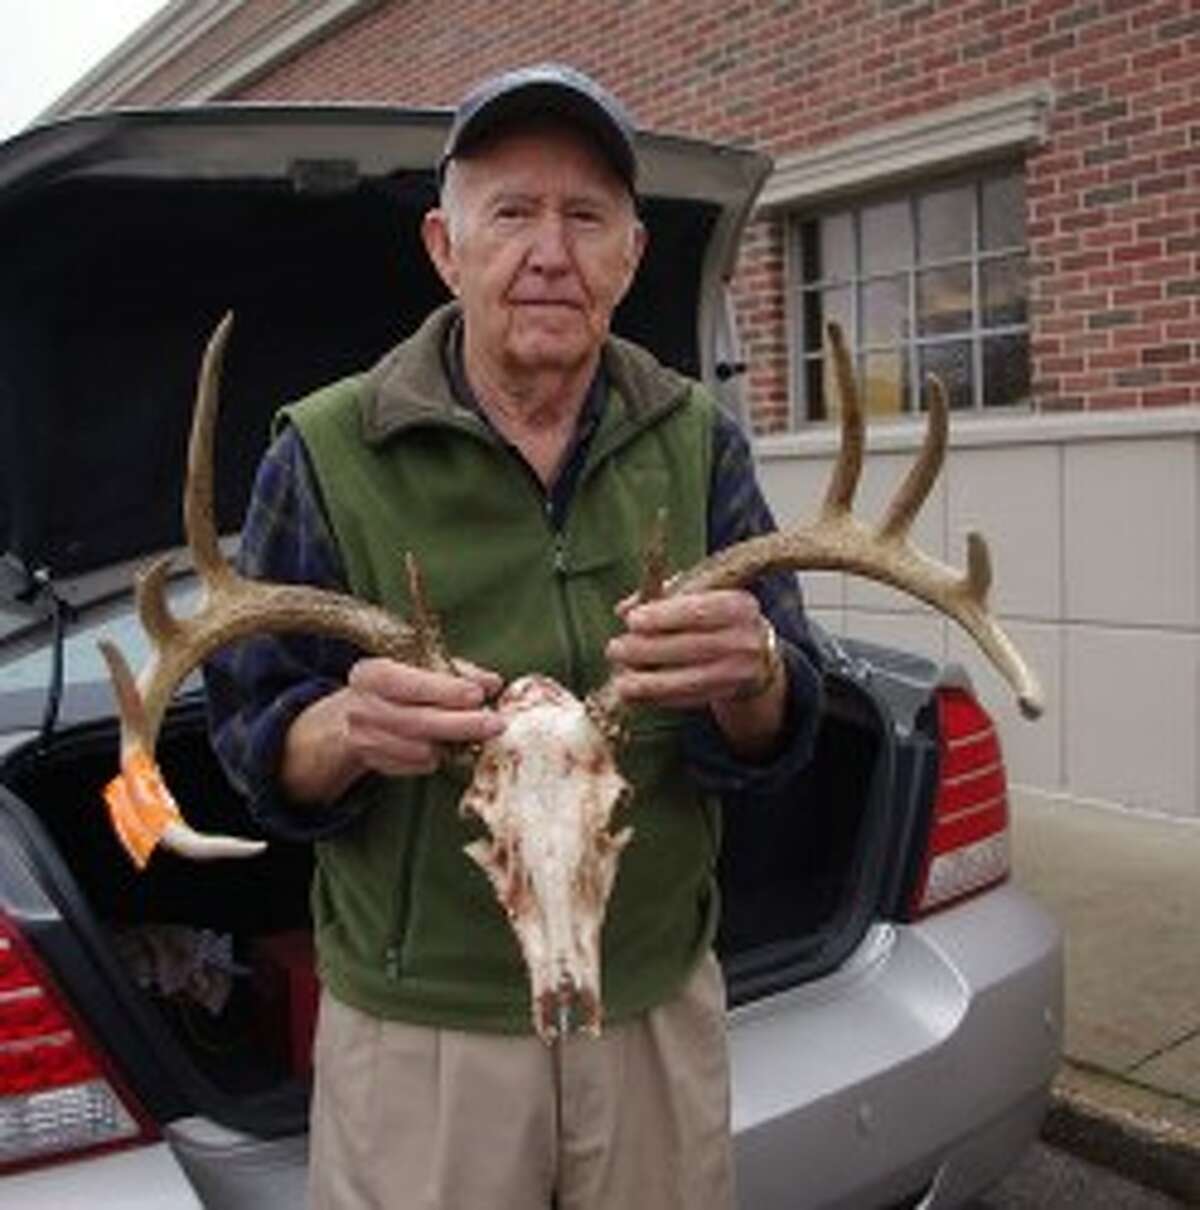 Robert Iverson of Bear Lake shot what he figures might be his 80th deer on opening day of firearm season. He shot the 10-pointer, which weighed 153 pounds and had an antler spread of 23 inches, in Pleasanton Township and won the buck pole contest in Irons. (Dave Yarnell/News Advocate)